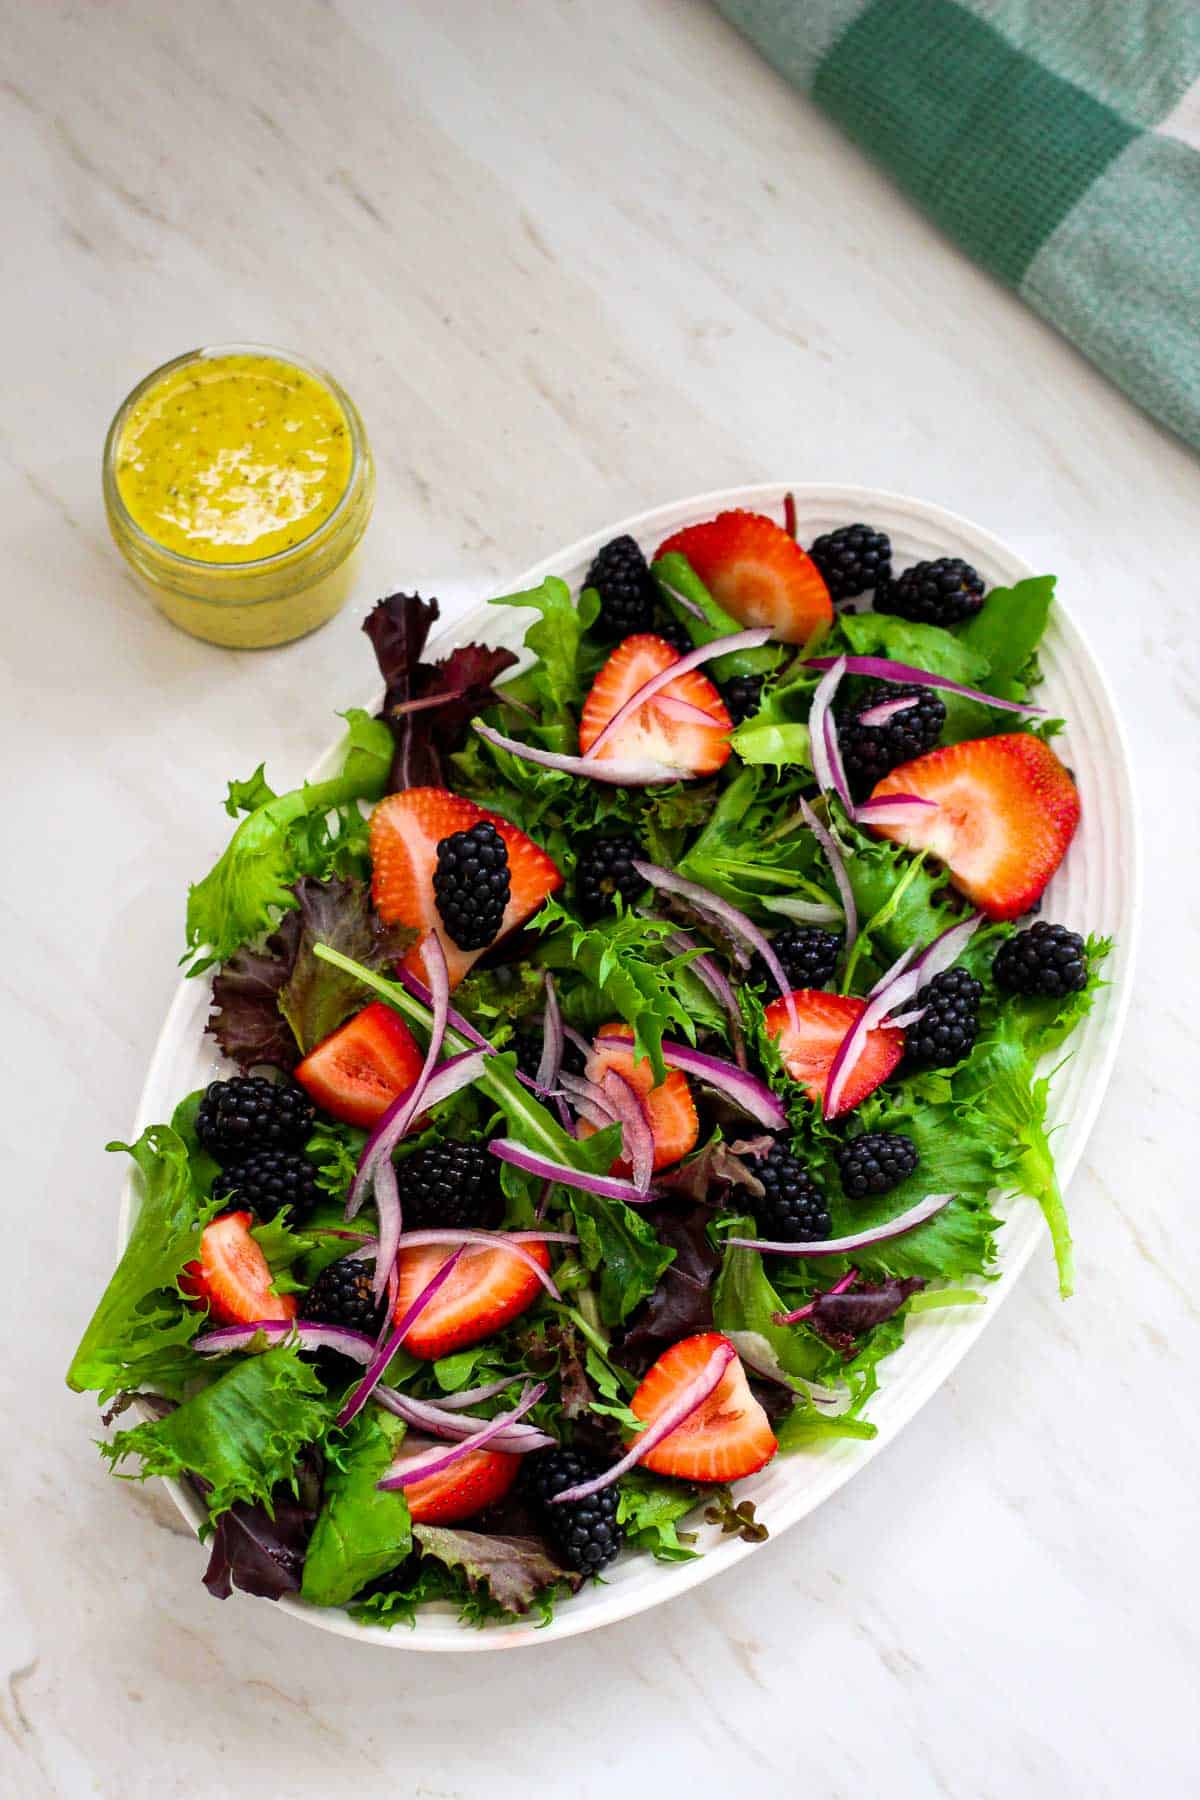 An oval platter with greens, strawberries, blackberries, onions etc. On the side of the platter you can see the vinaigrette.